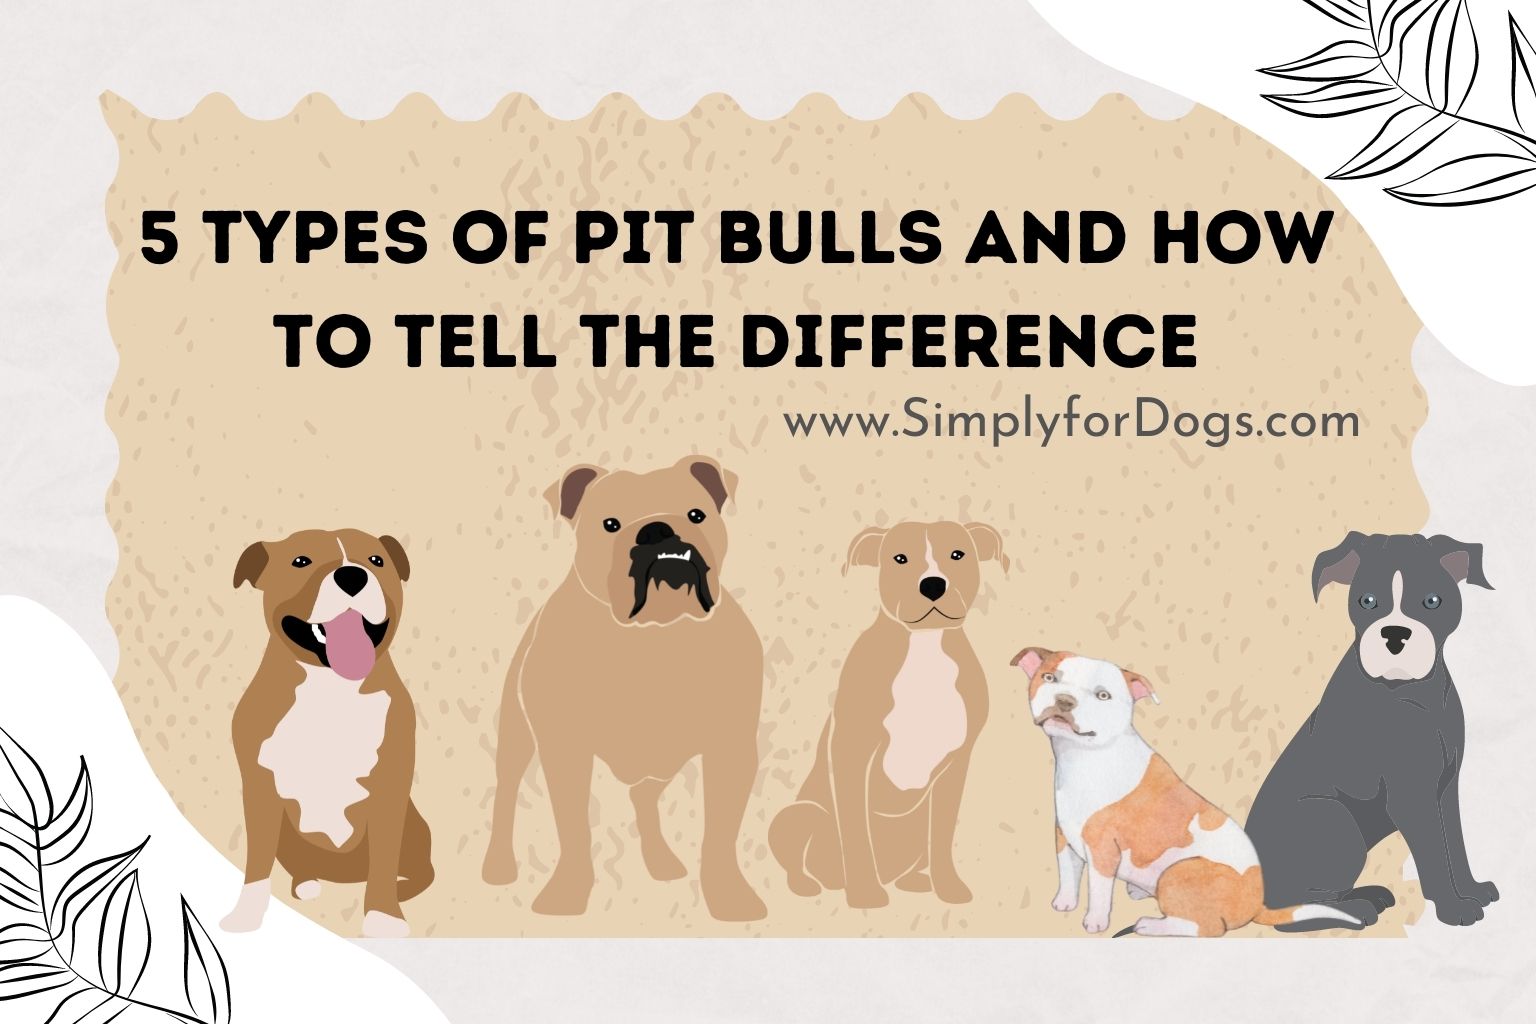 5 Types of Pit Bulls and How to Tell the Difference